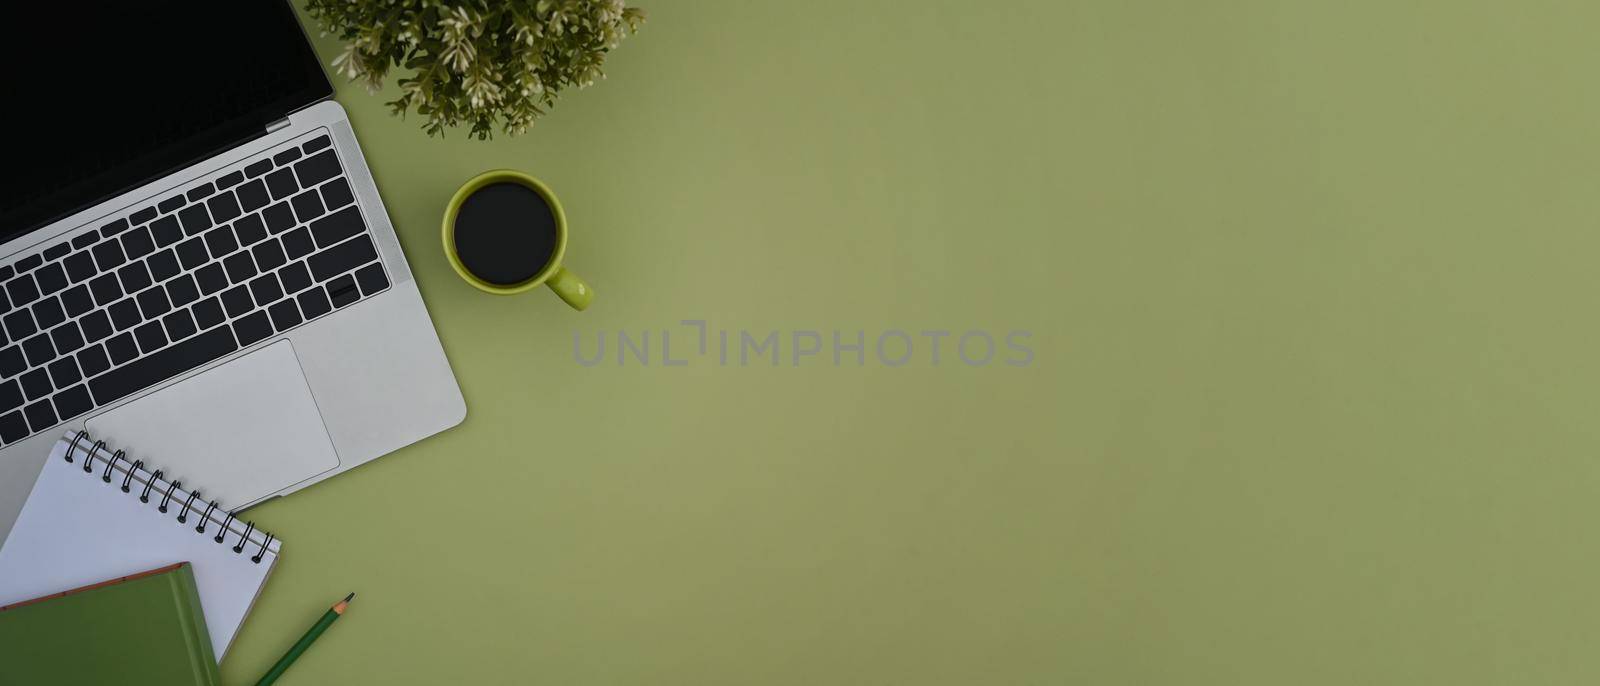 Top view laptop, notebook, coffee cup and potted plant on green background with copy space.